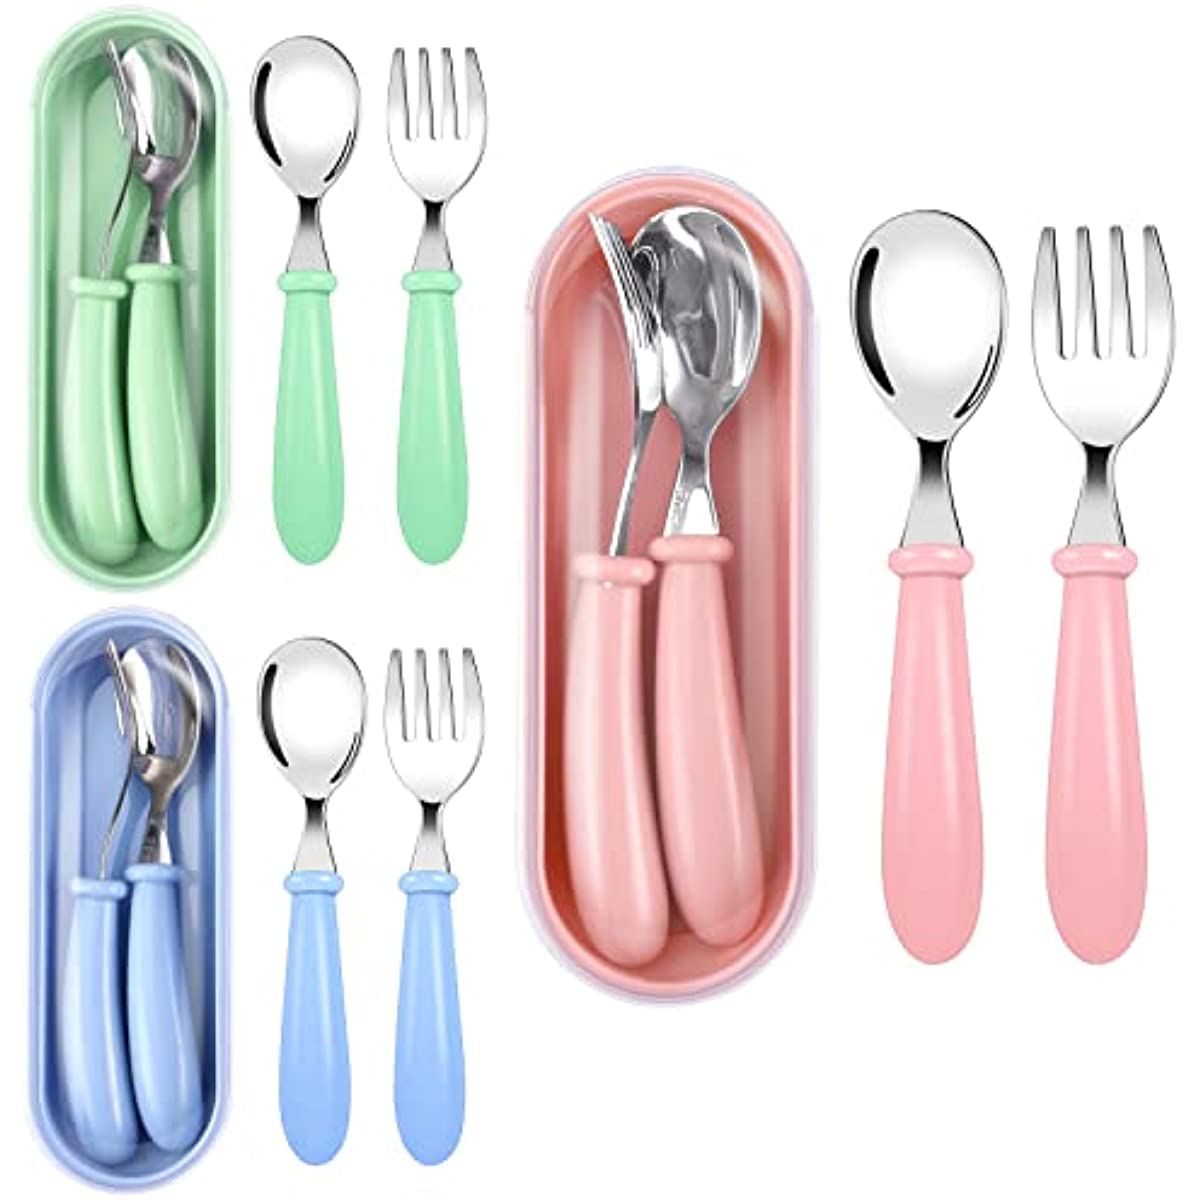 Toddler Utensils, Toddler Forks and Spoons, Stainless Steel